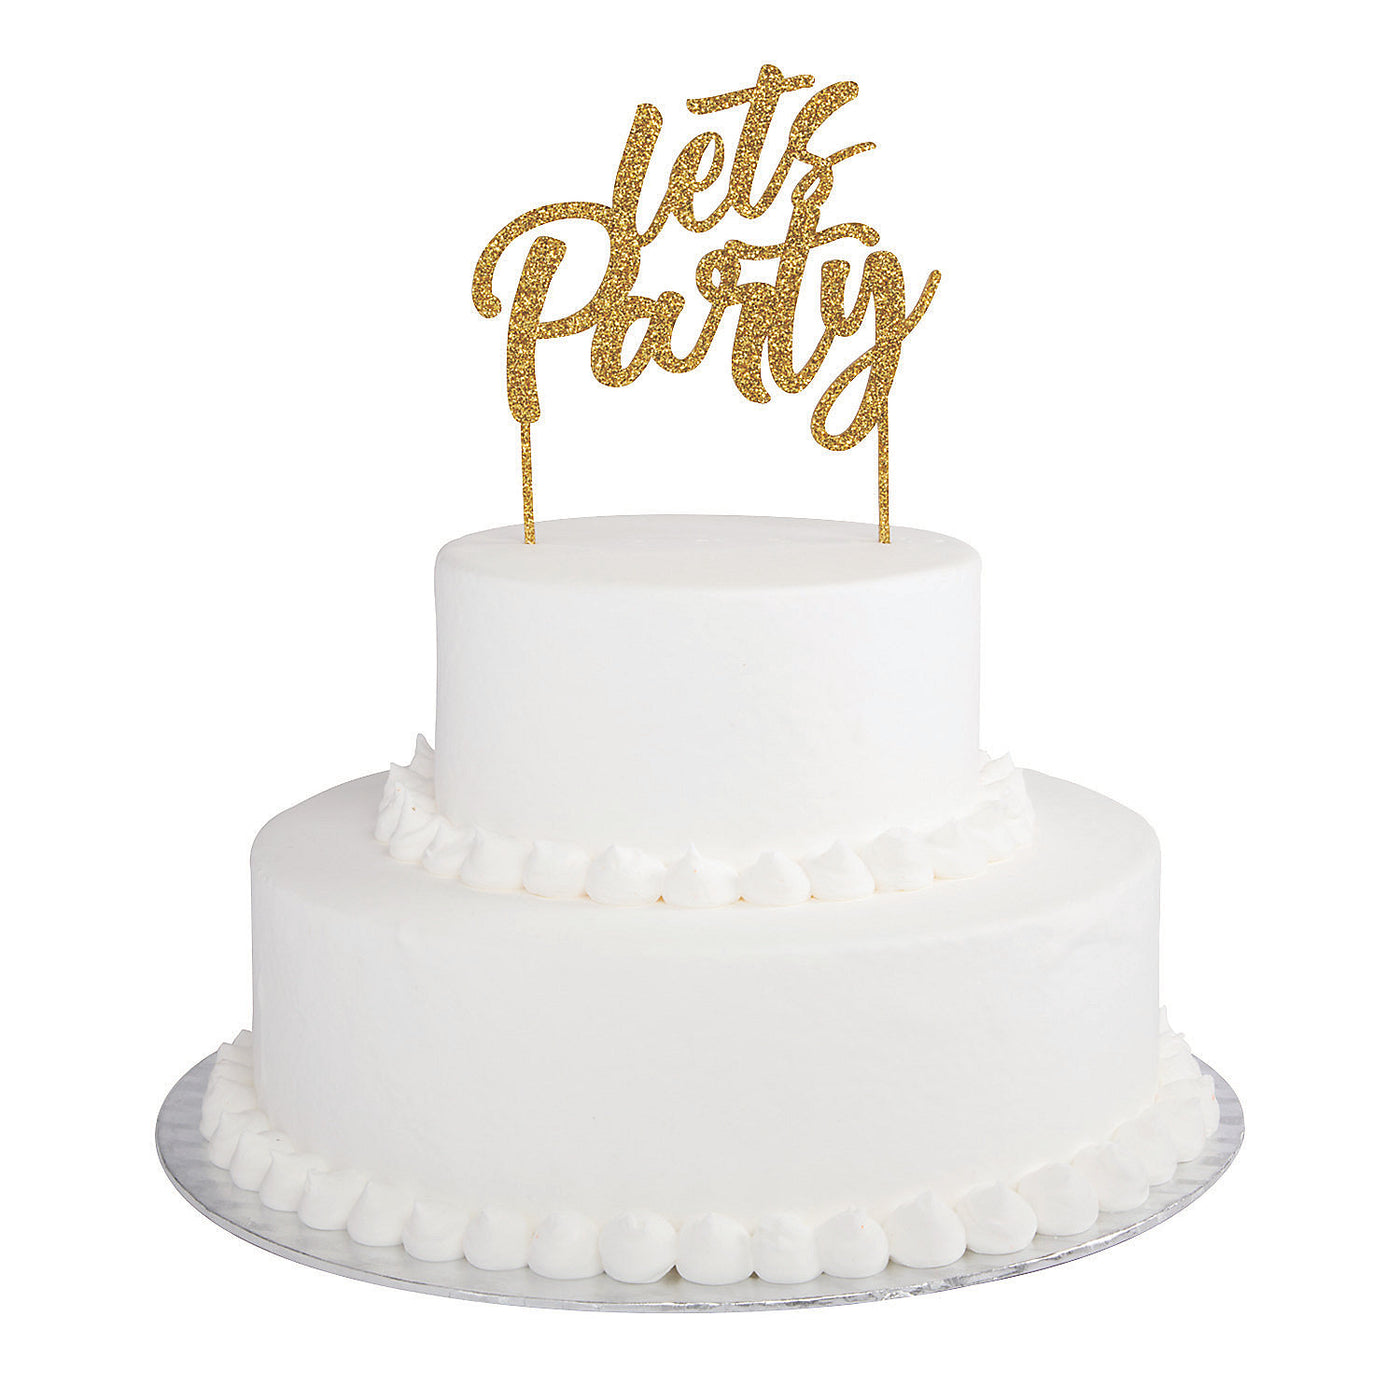 Let's Party Cake Topper